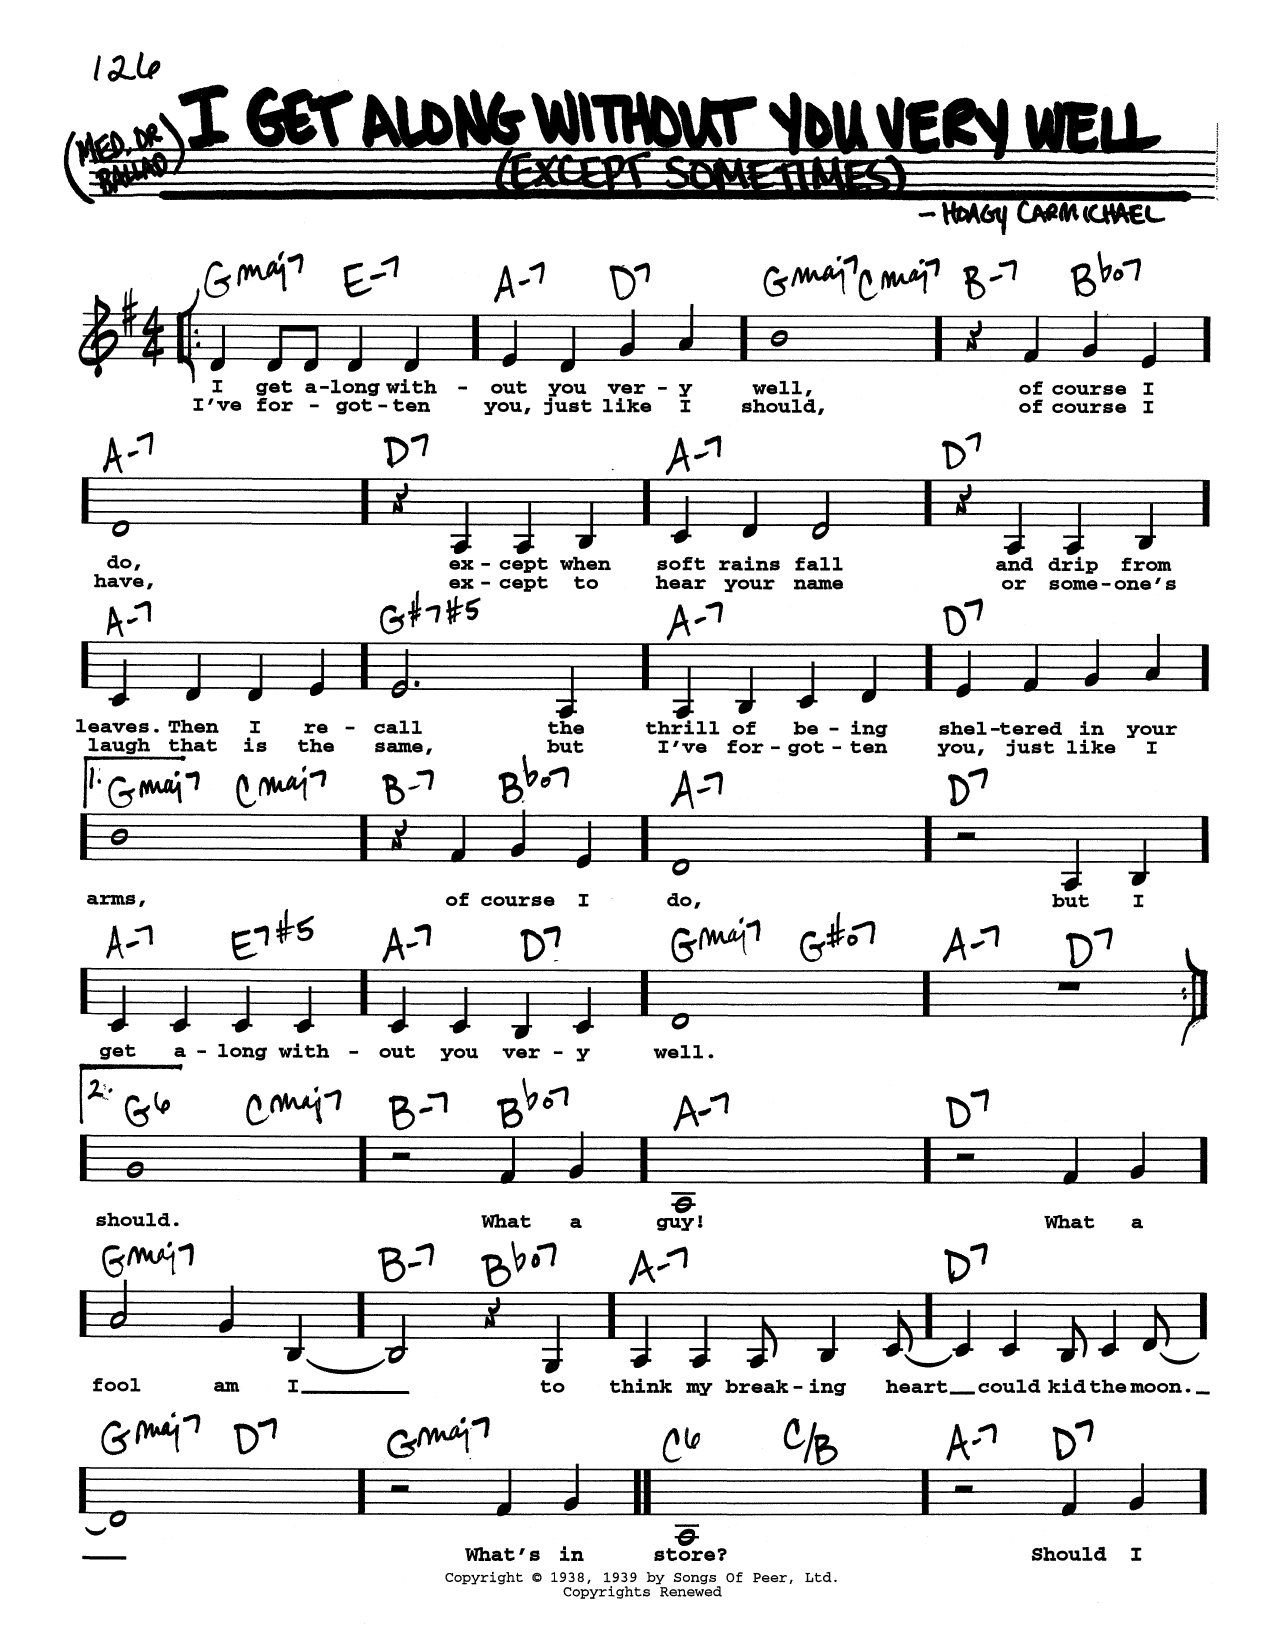 Hoagy Carmichael I Get Along Without You Very Well (Except Sometimes) (Low Voice) sheet music notes printable PDF score